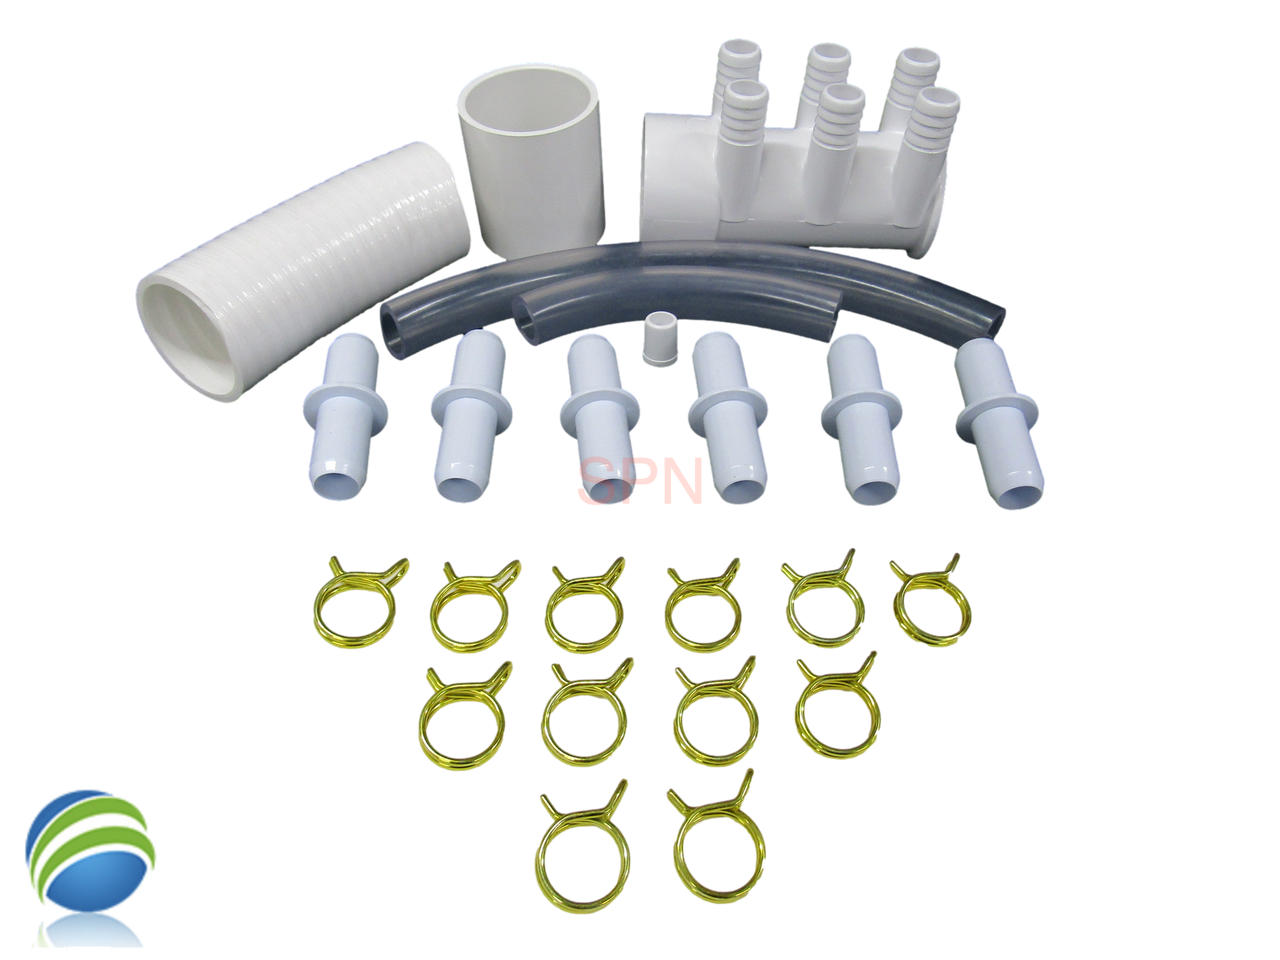 Manifold Hot Tub Spa Dead End x 2" Slip (6)3/4" Coupler Kit Video How To